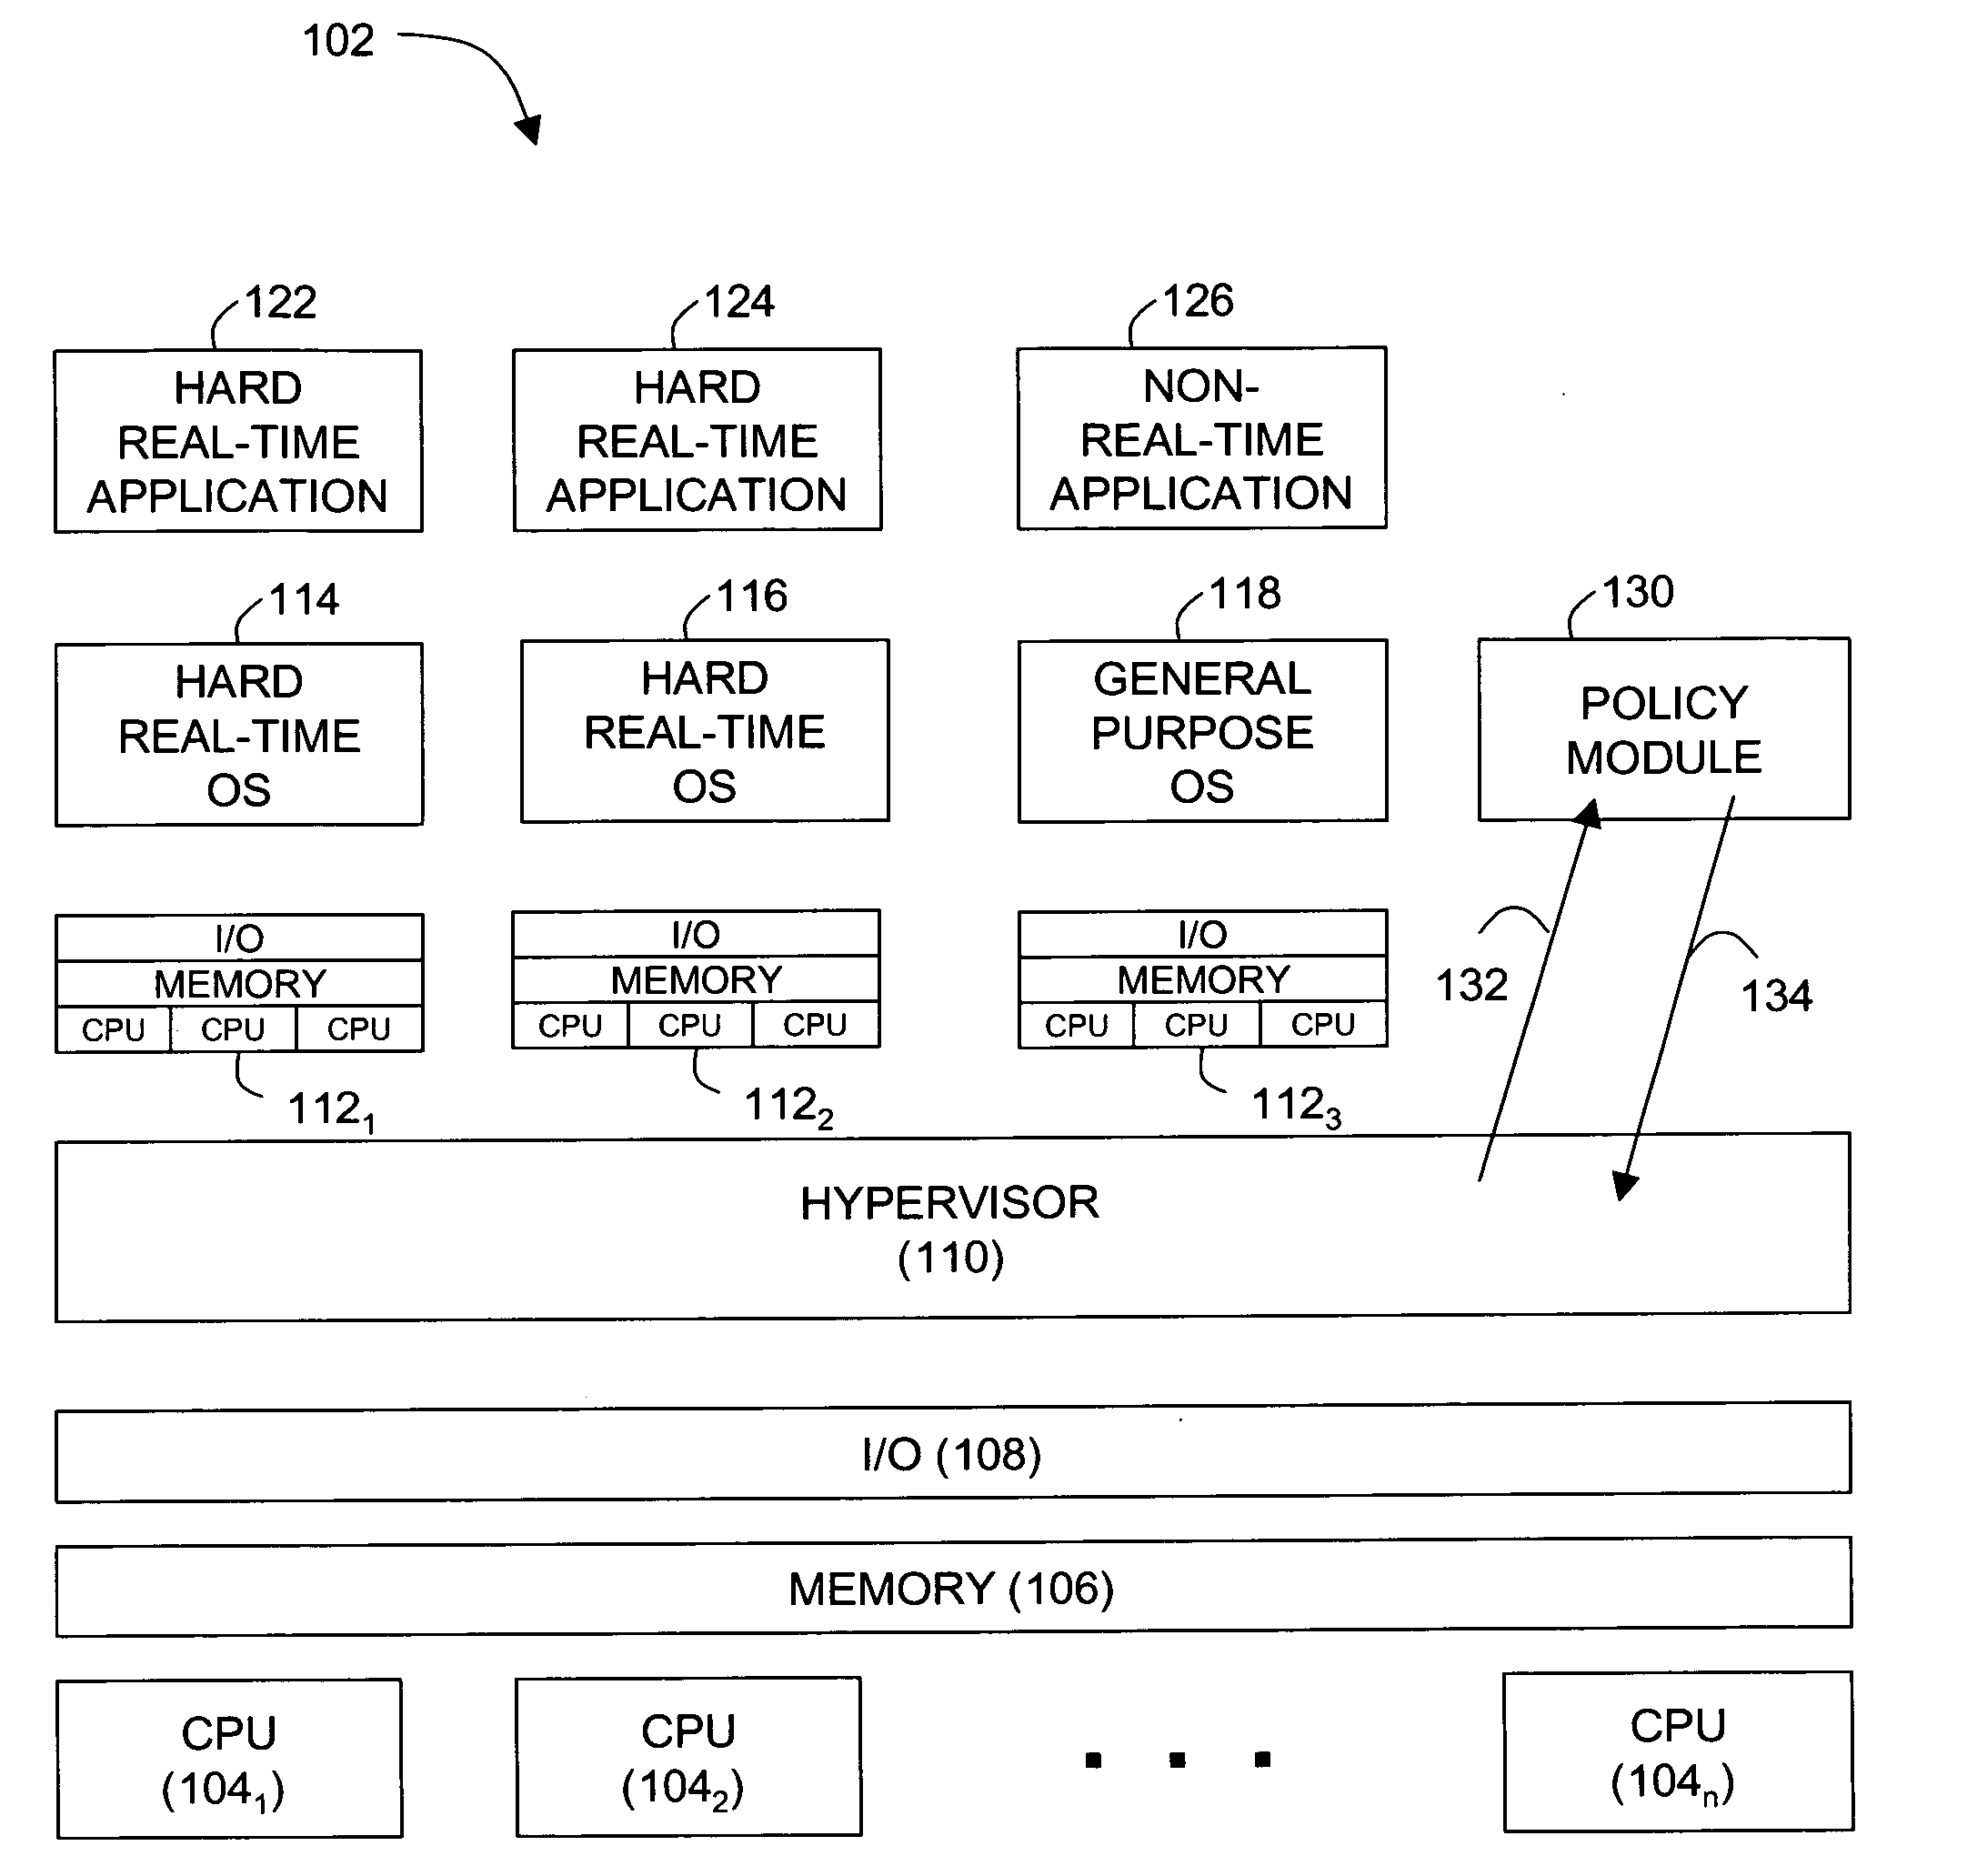 Enhancement of real-time operating system functionality using a hypervisor